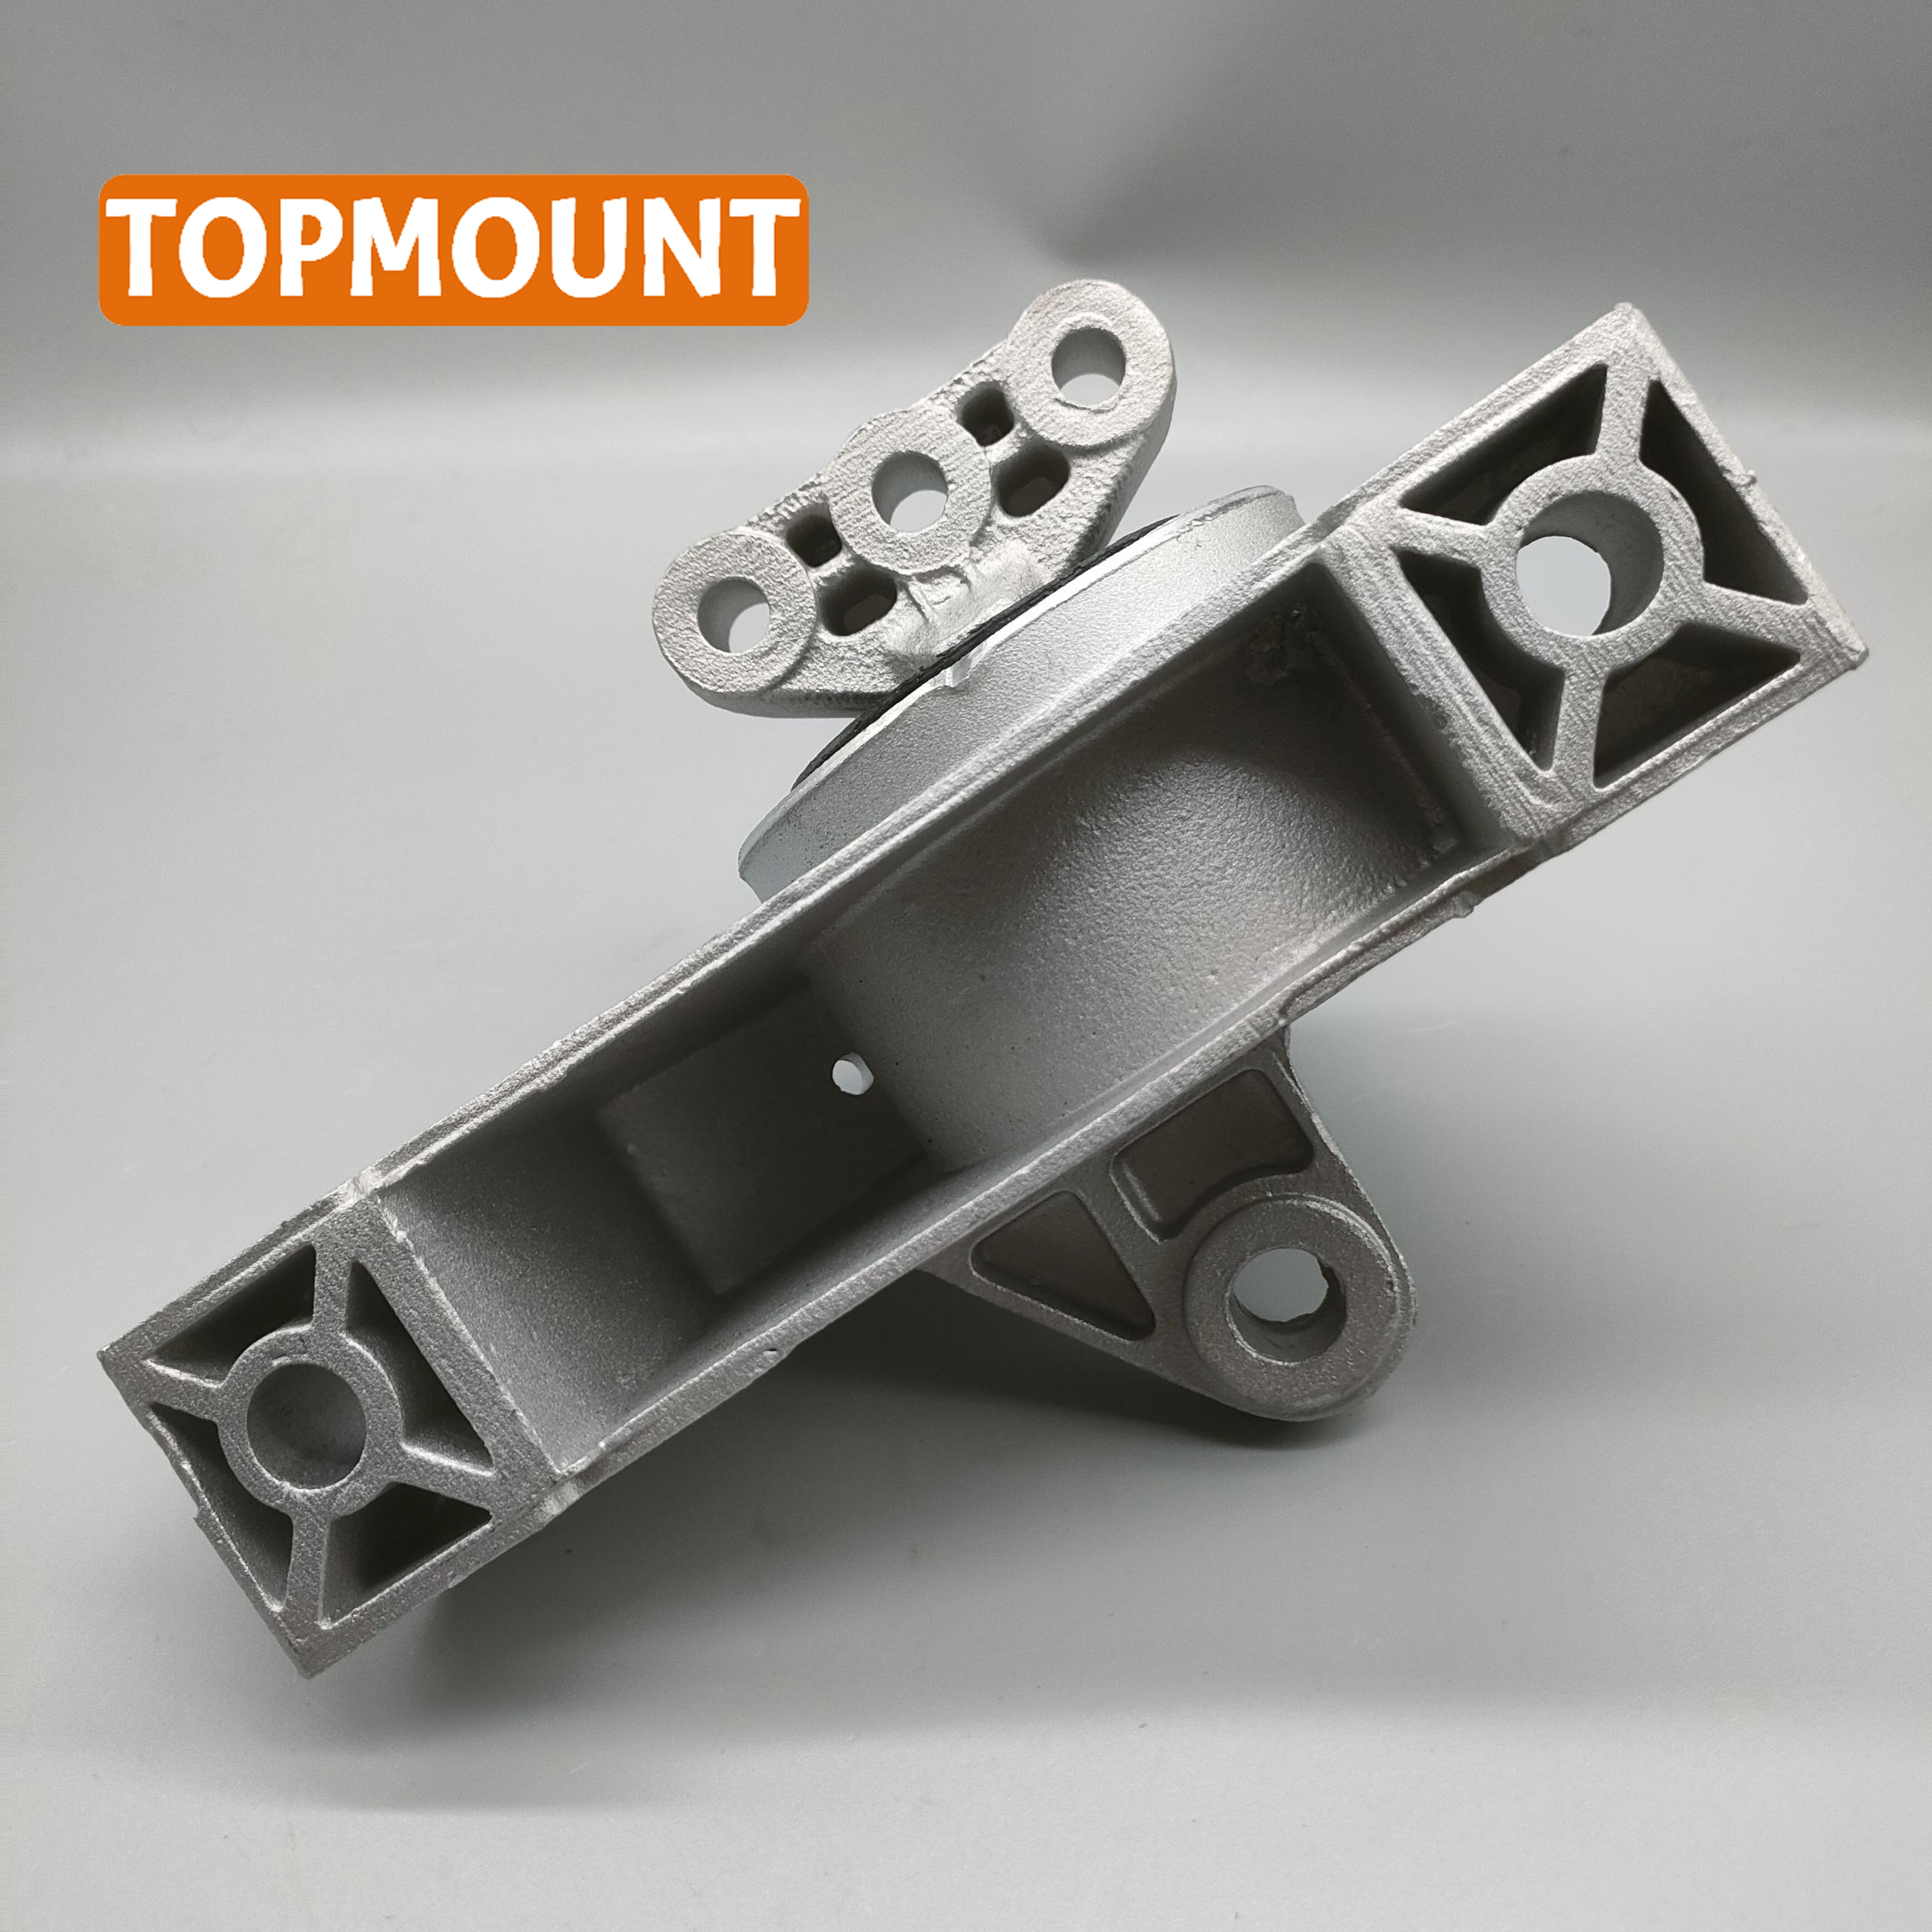 TOPMOUNT 51848394 51921213 Engine Mount for Fiat Grand Siena Featured Image